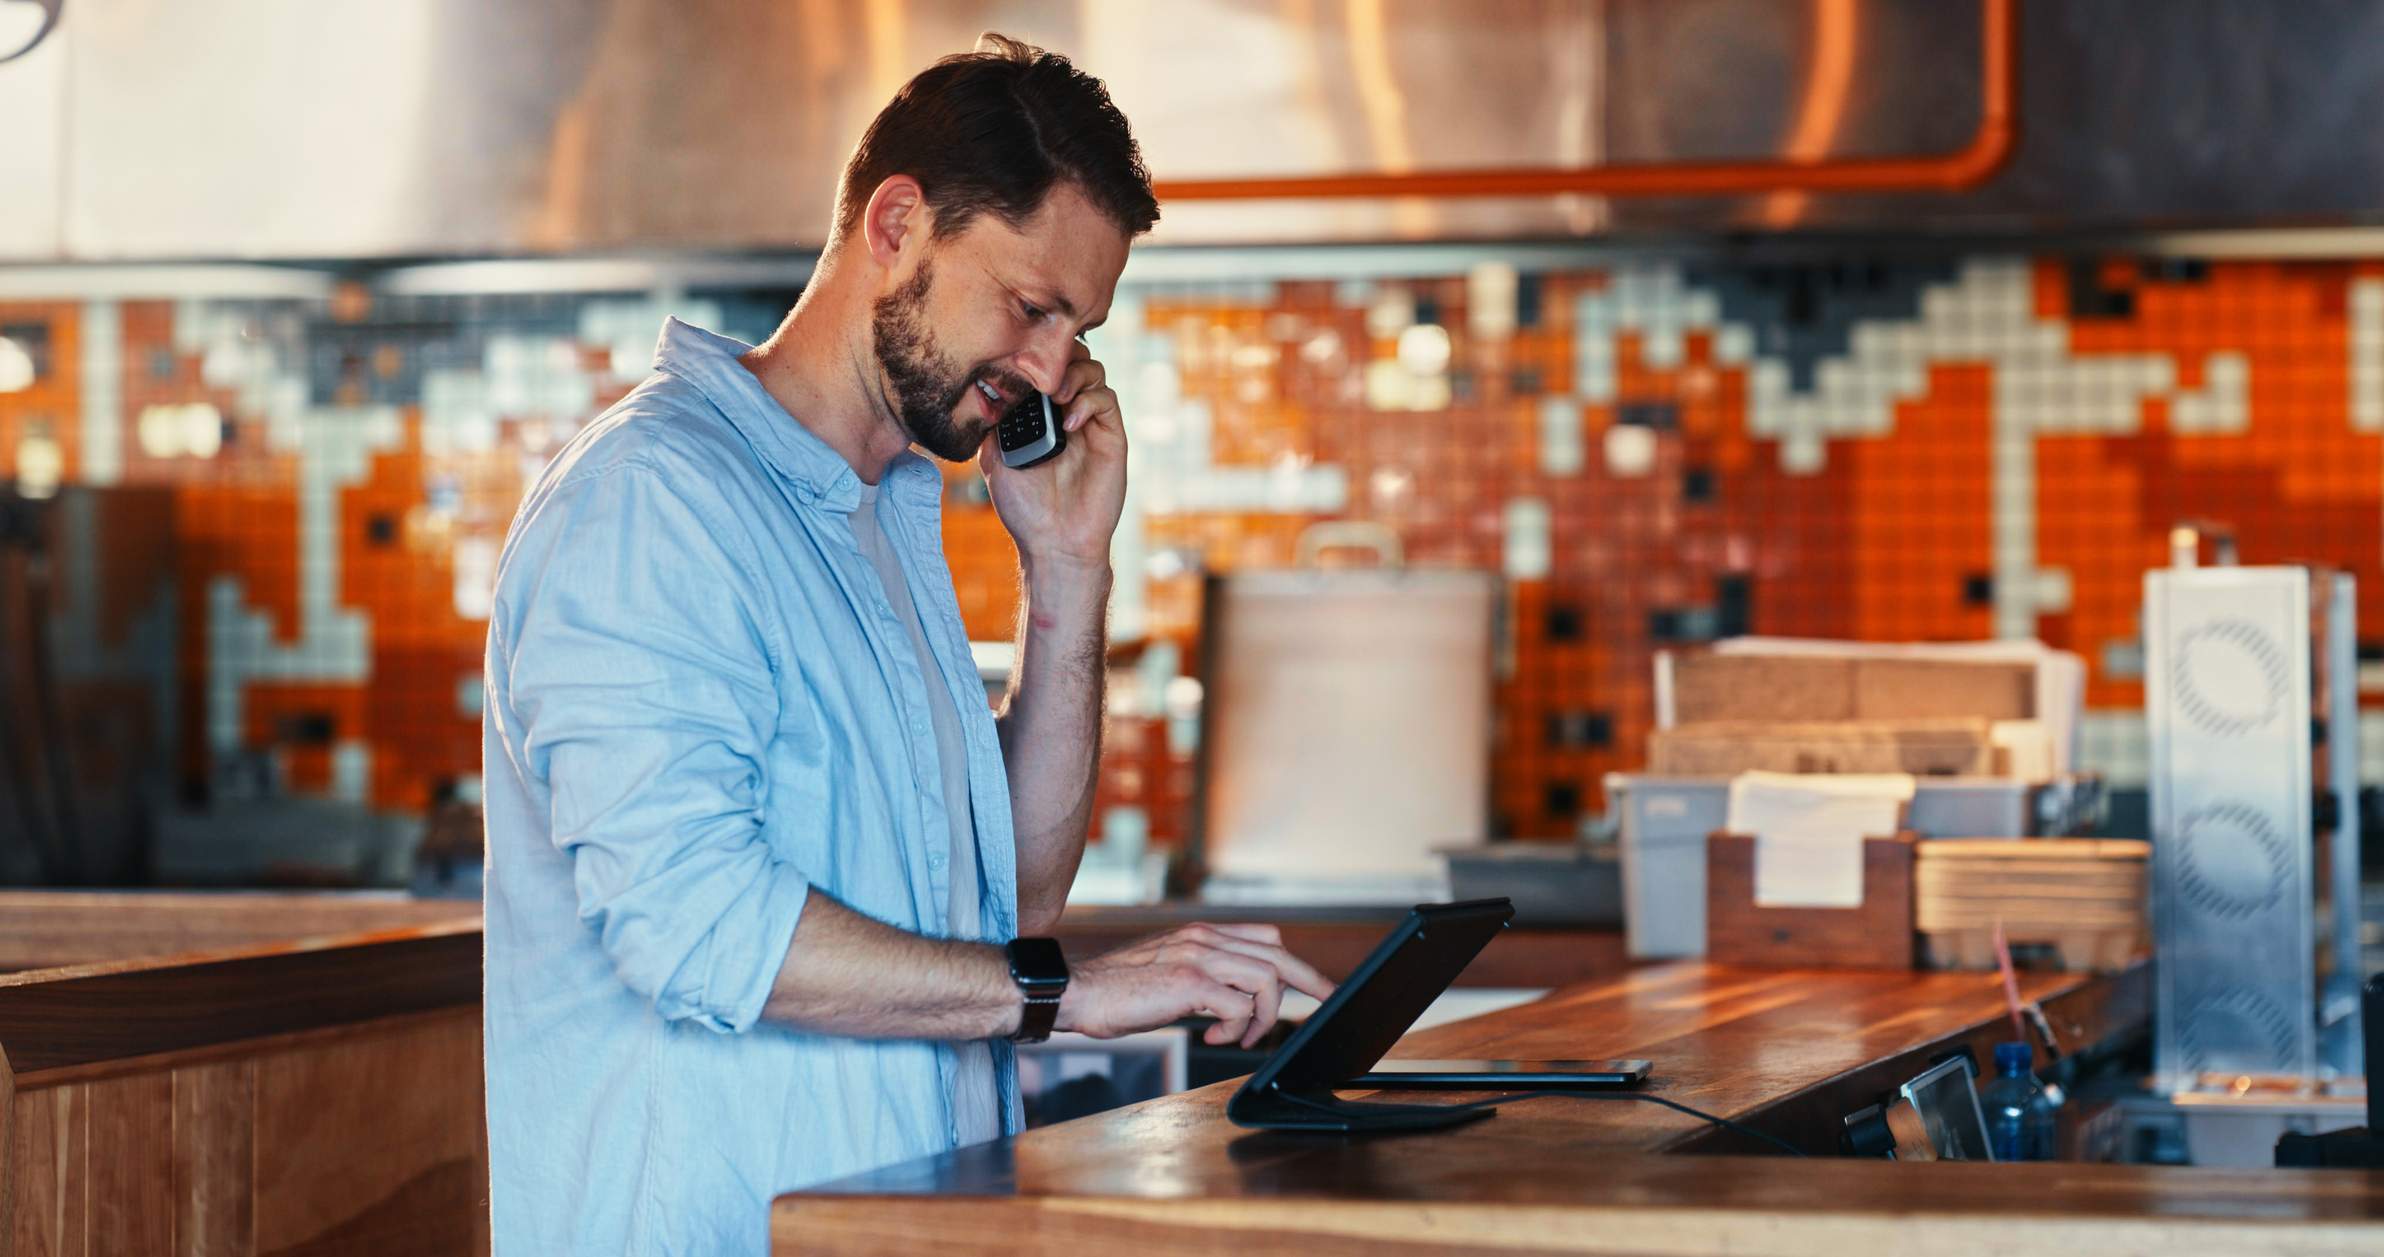 Image depicts a restaurant worker talking on the phone while using a tablet. 